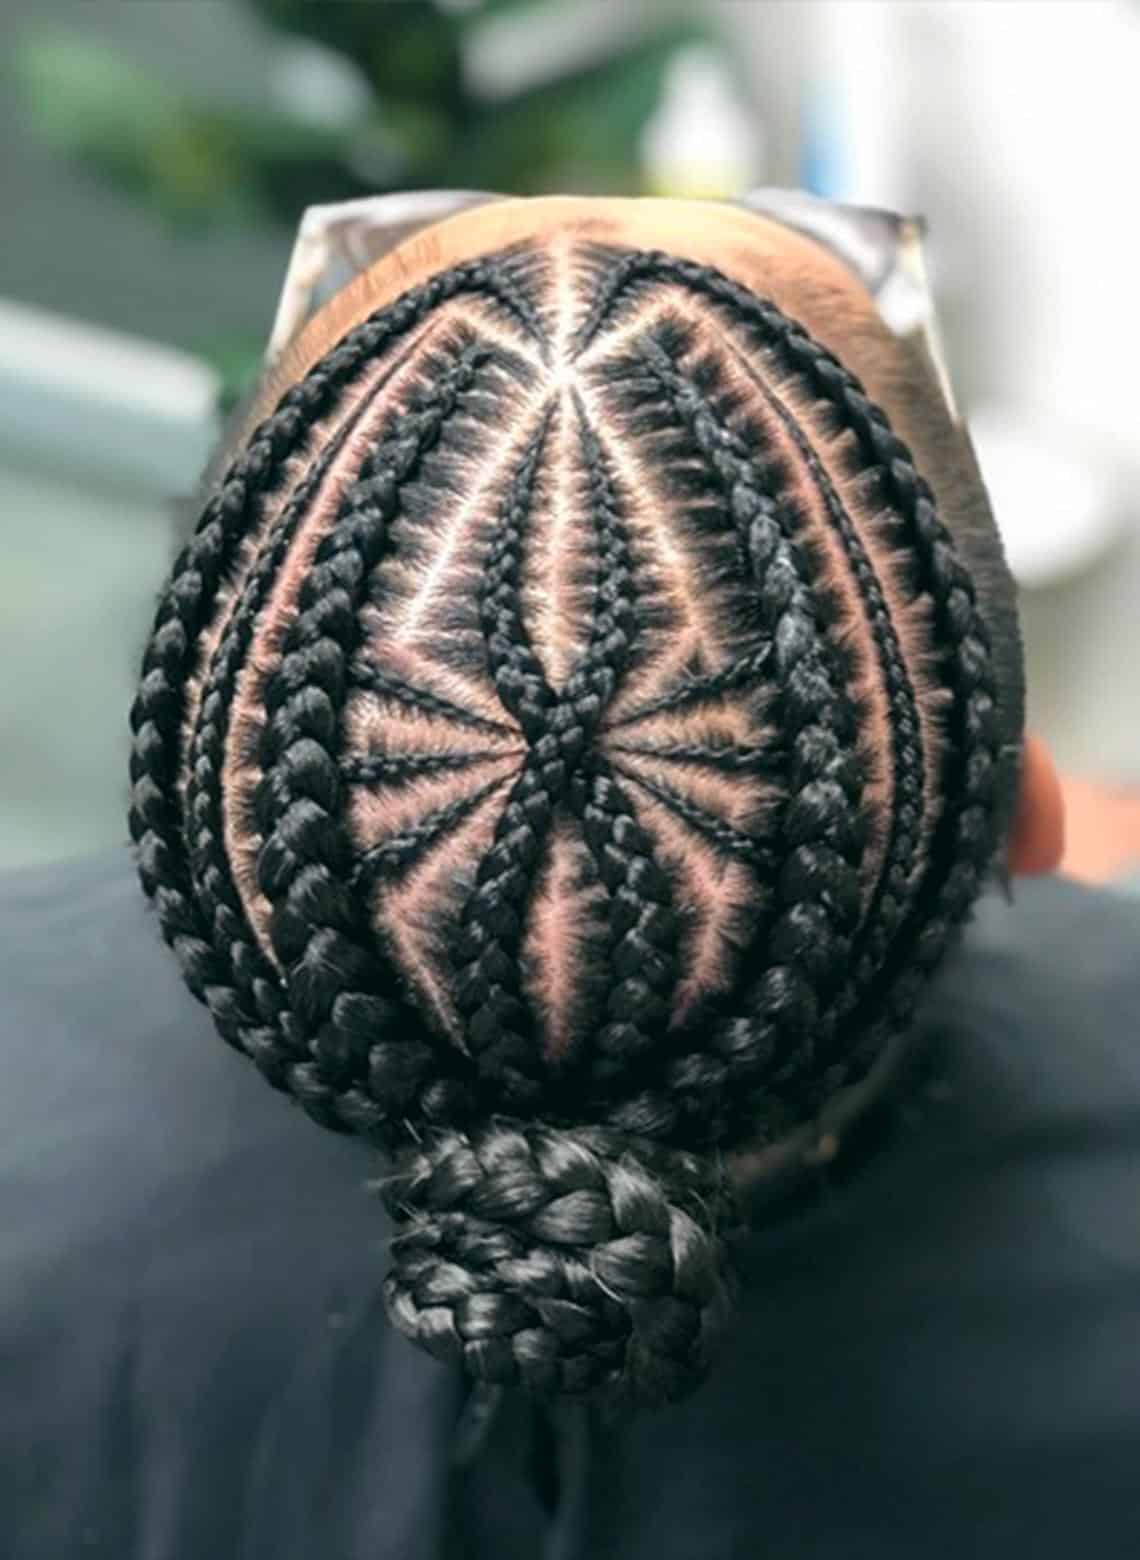 person with intricate braided design